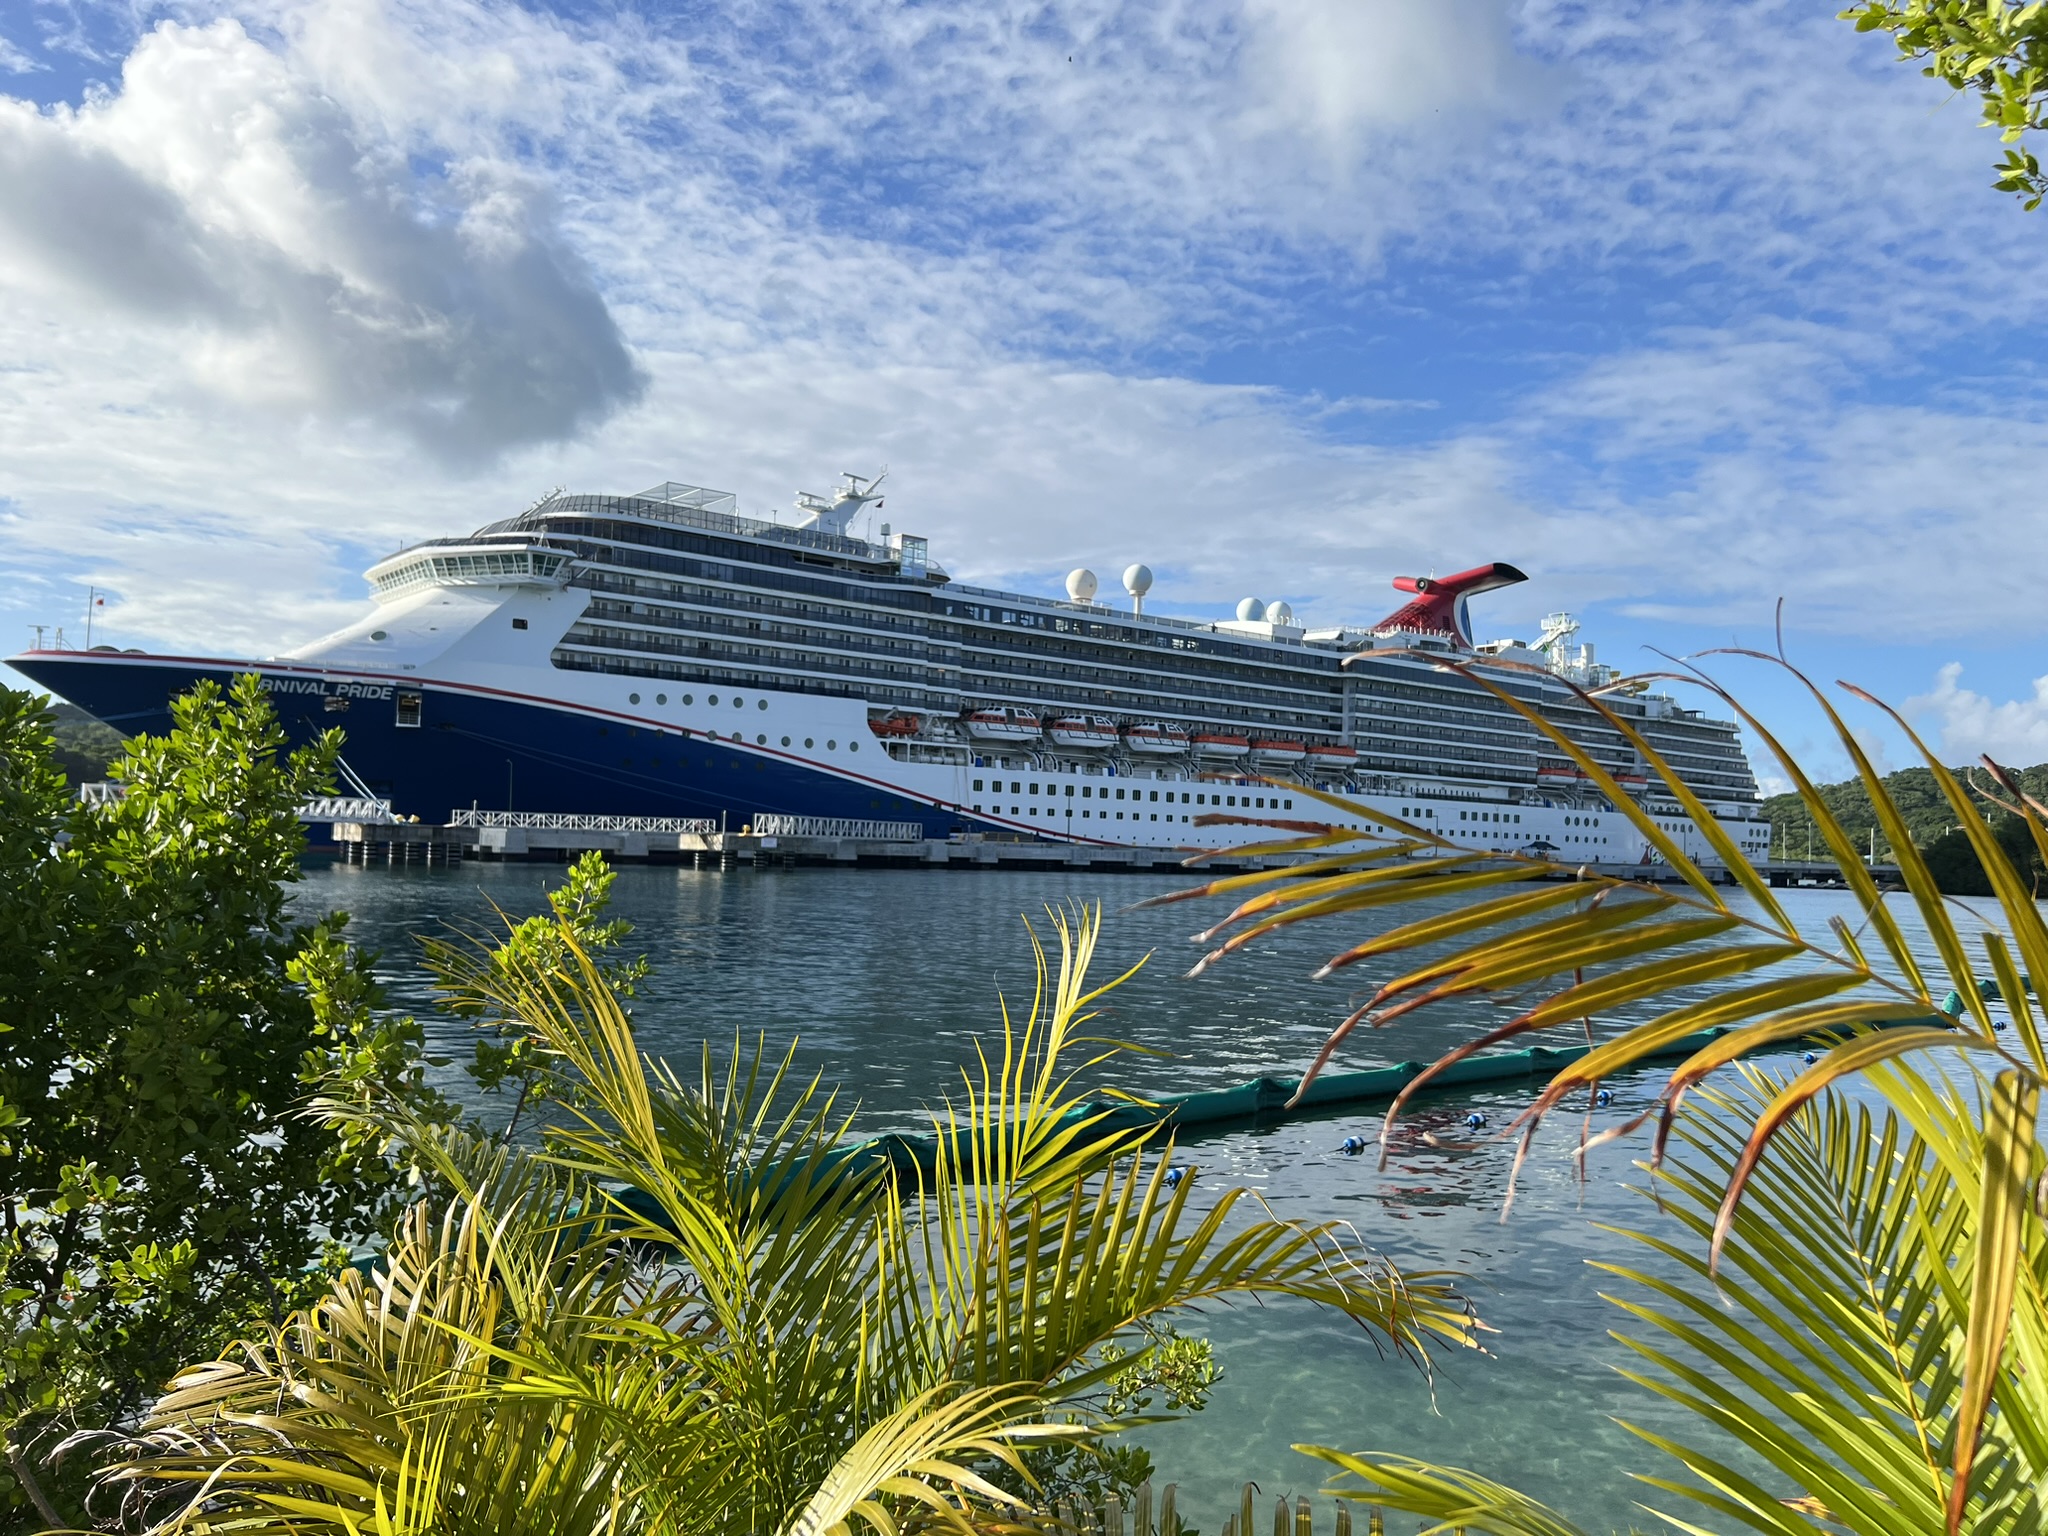 Cruise Ship Reviews - Cruise Ship Carnival Pride Review Including Likes and Dislikes of the Ship